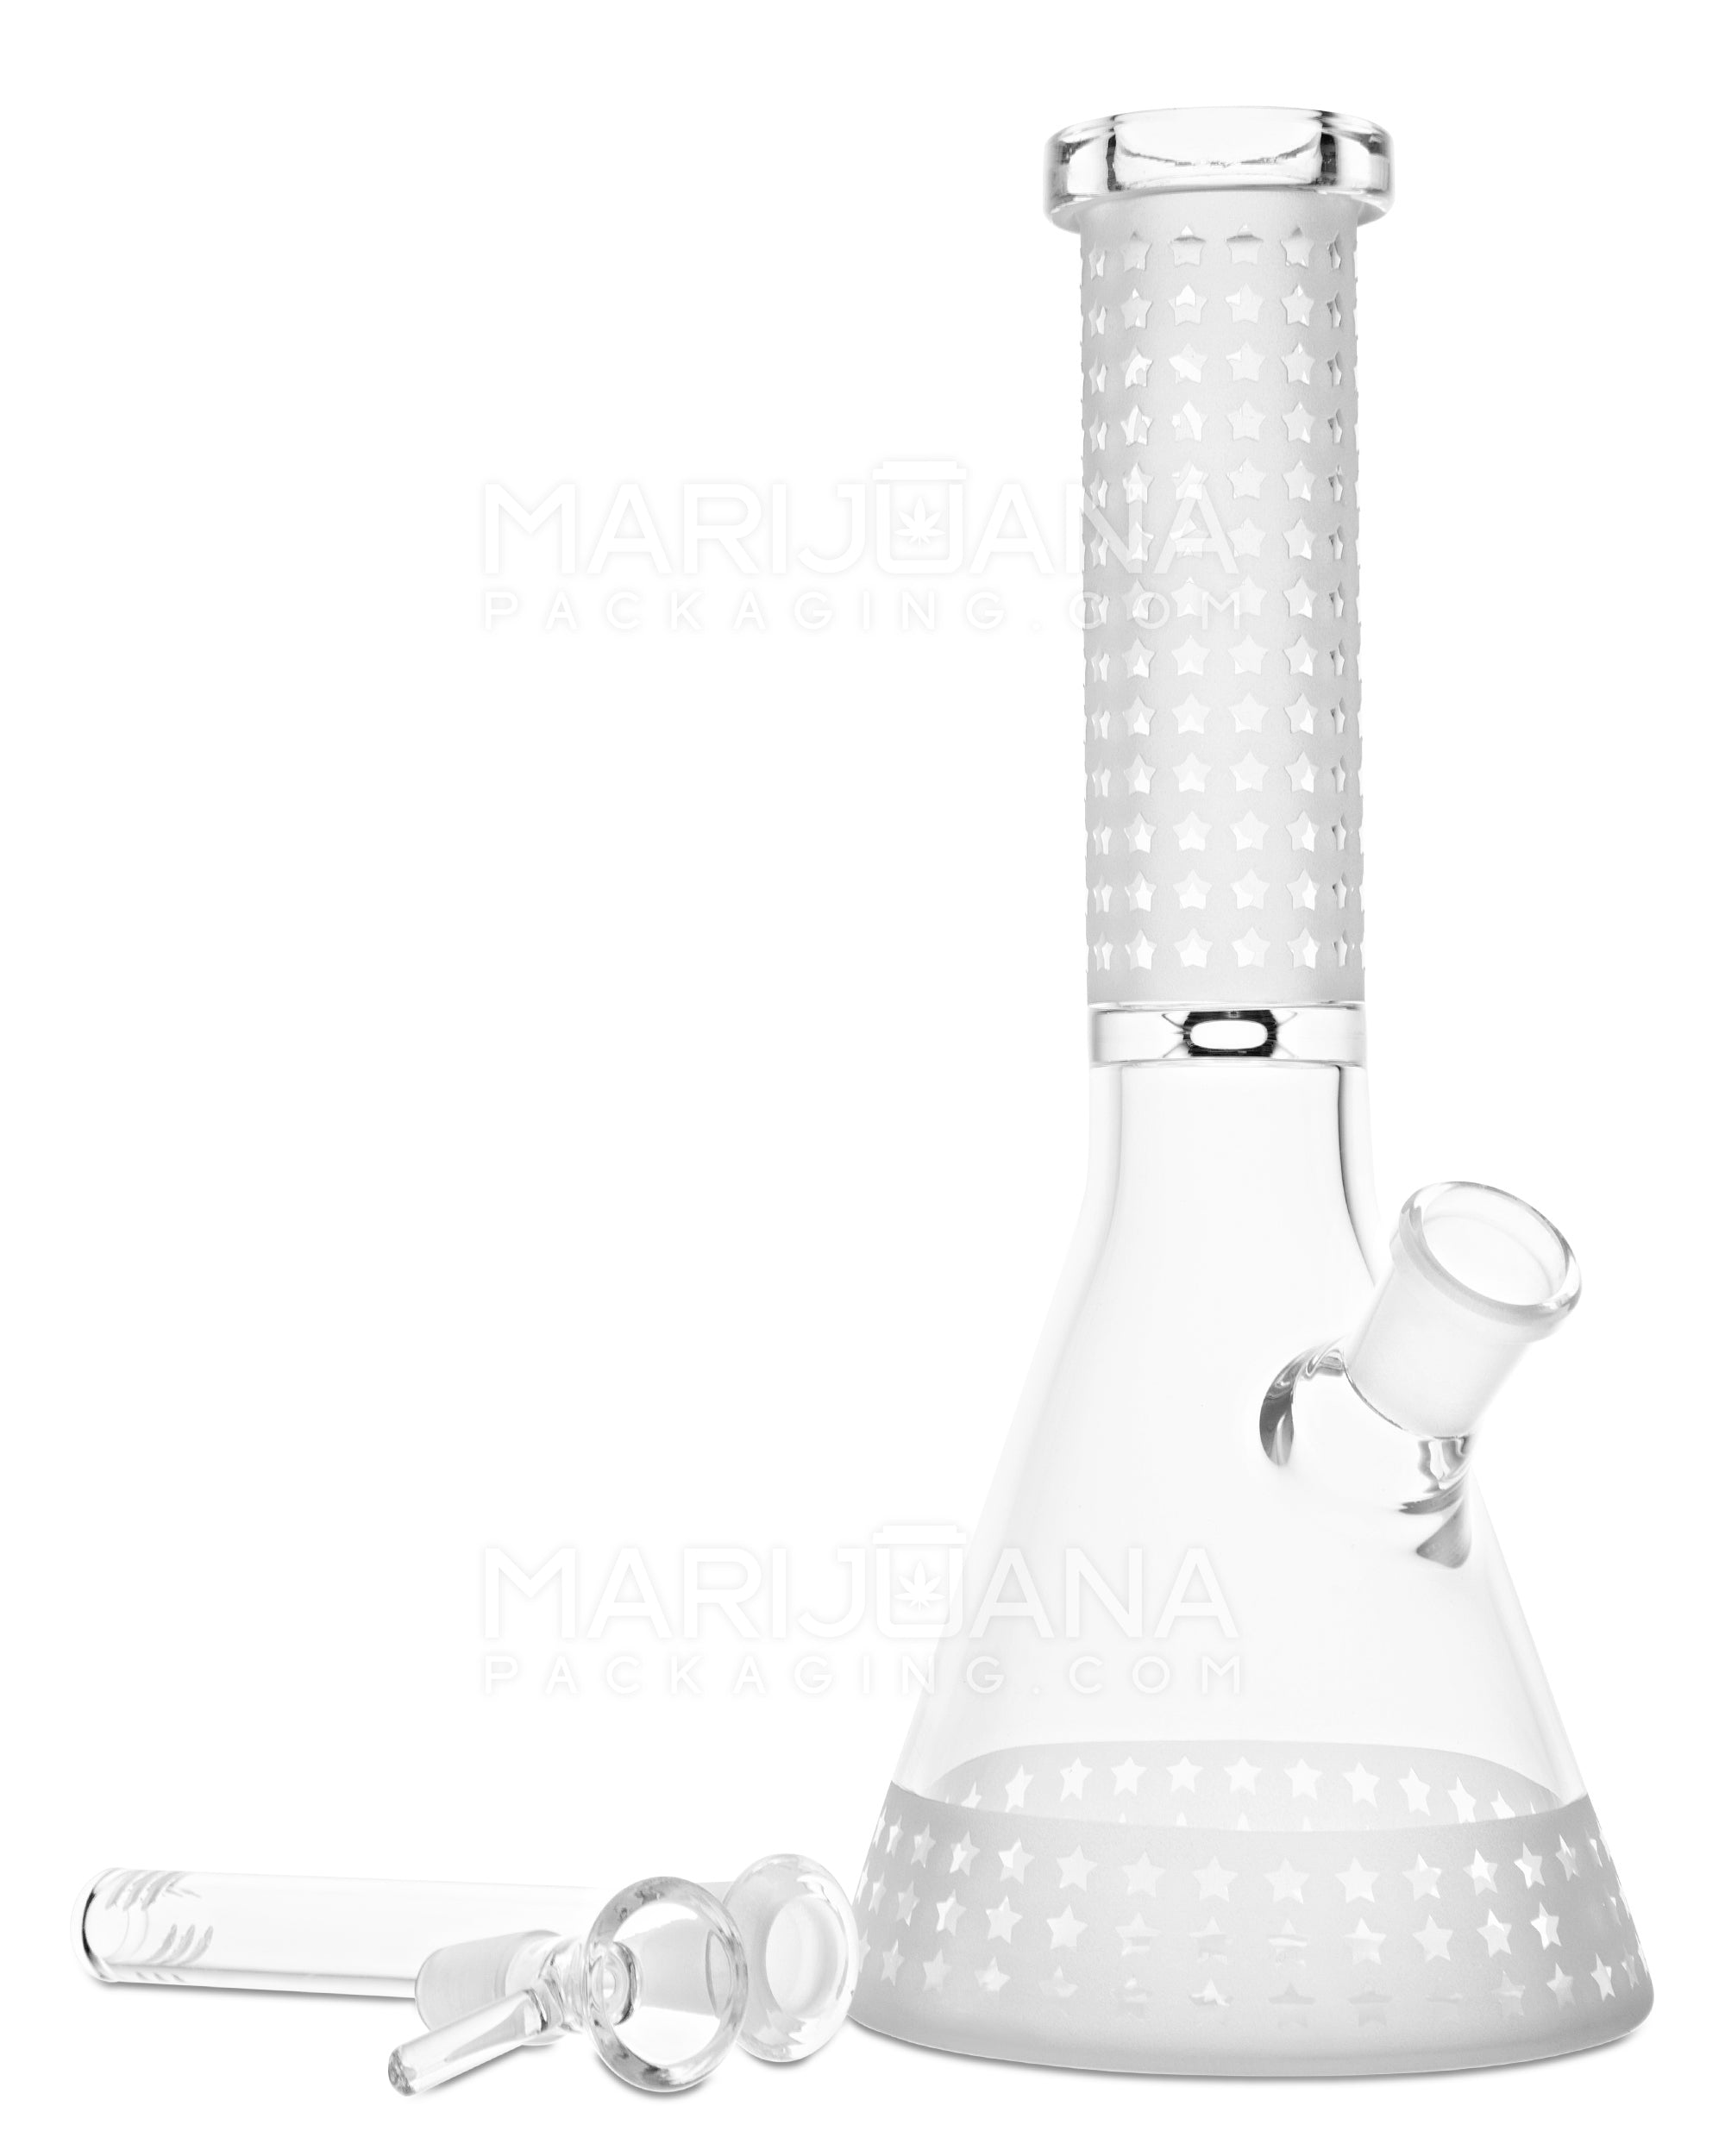 Straight Neck Sandblasted Stars Decal Glass Beaker Water Pipe | 10.5in Tall - 14mm Bowl - Clear - 2